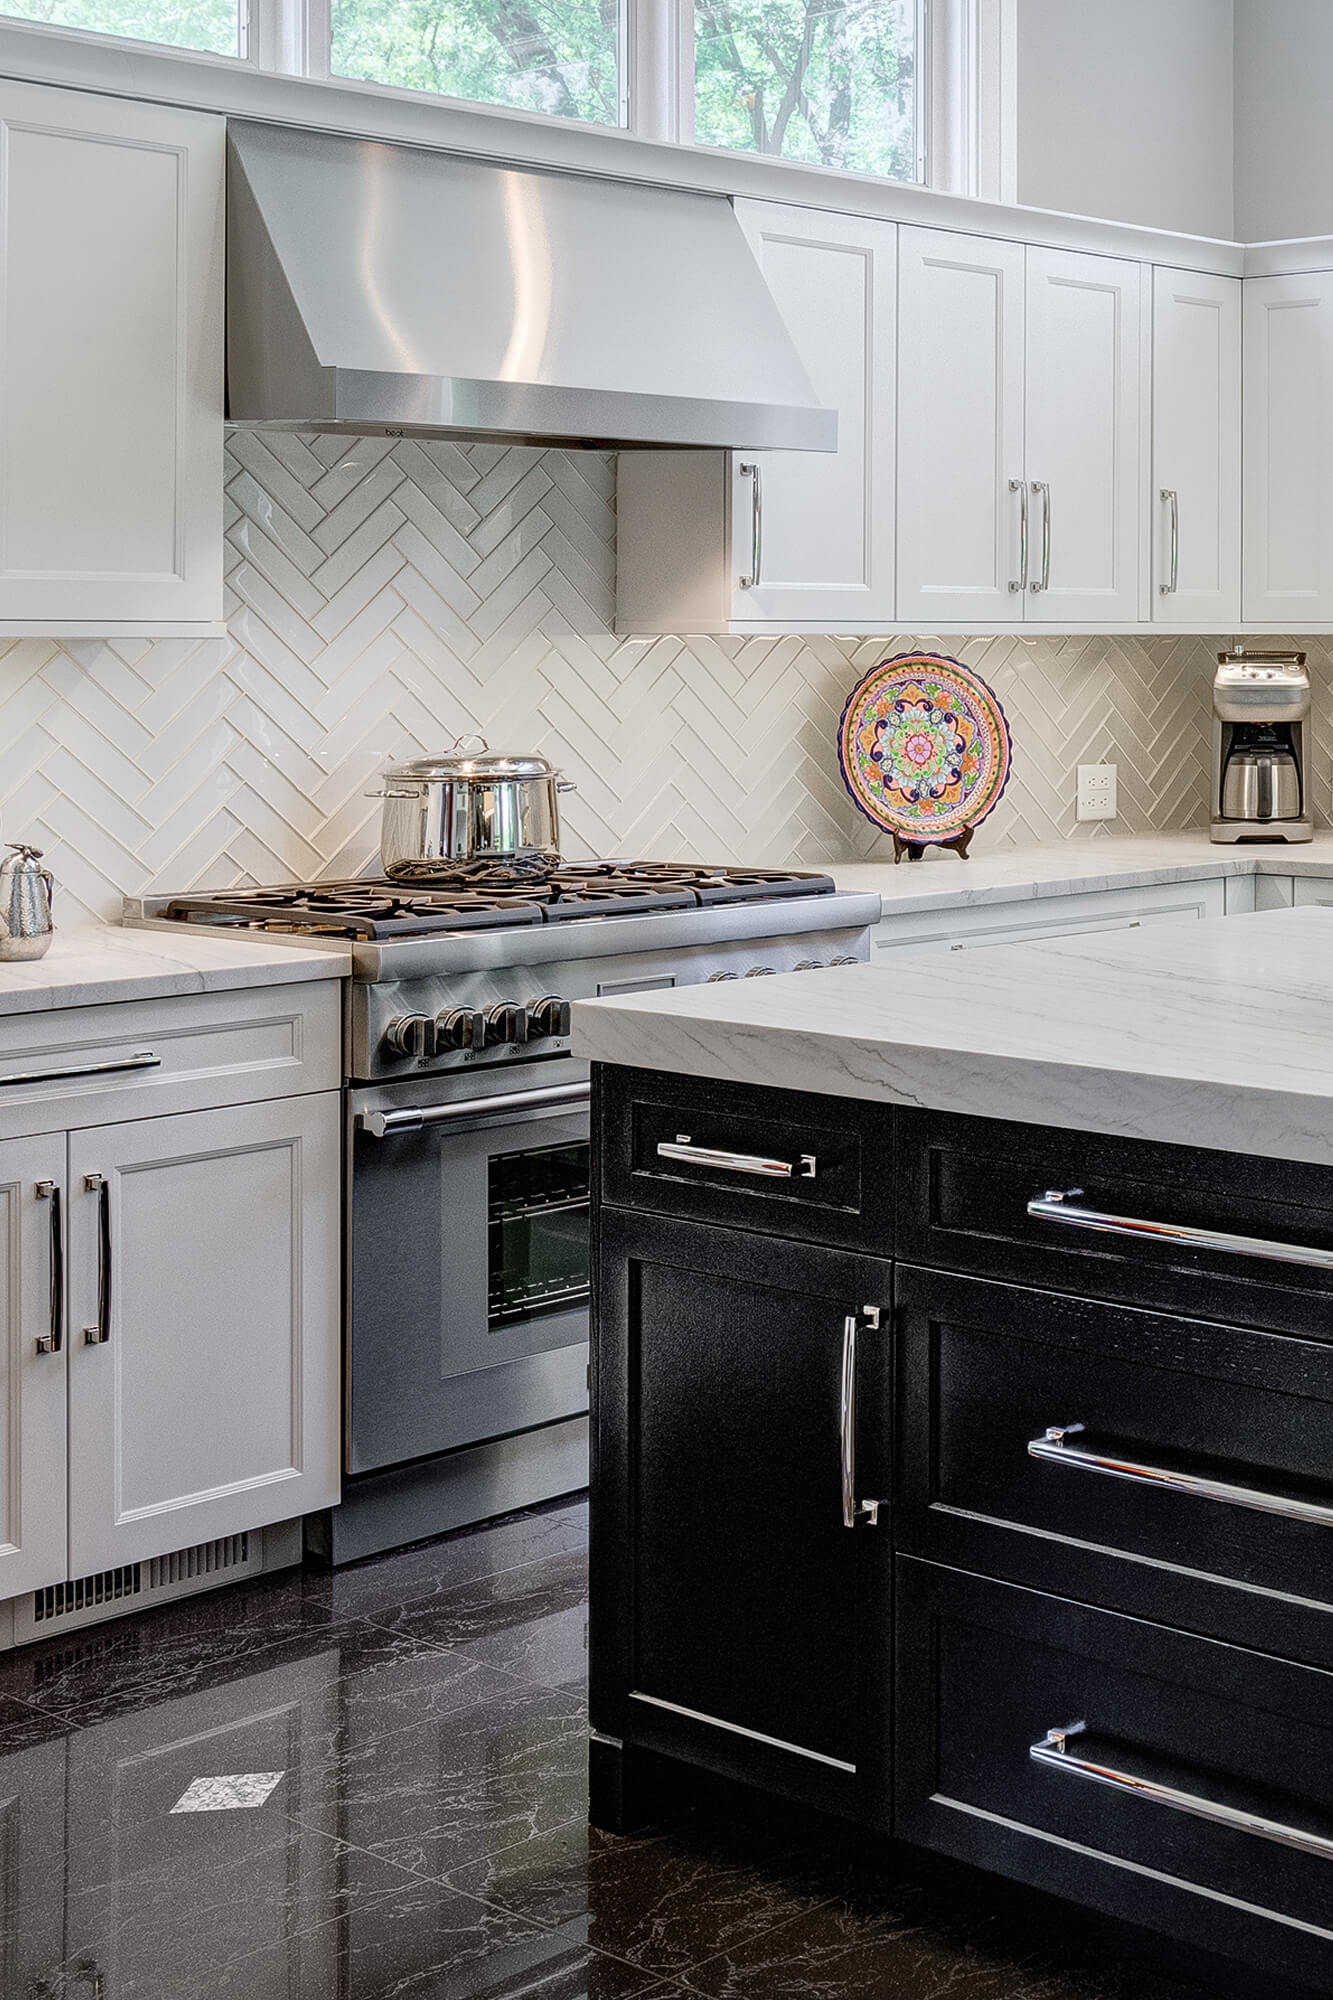 A white and black kitchen design with a cool color palette and white painted cabinets.